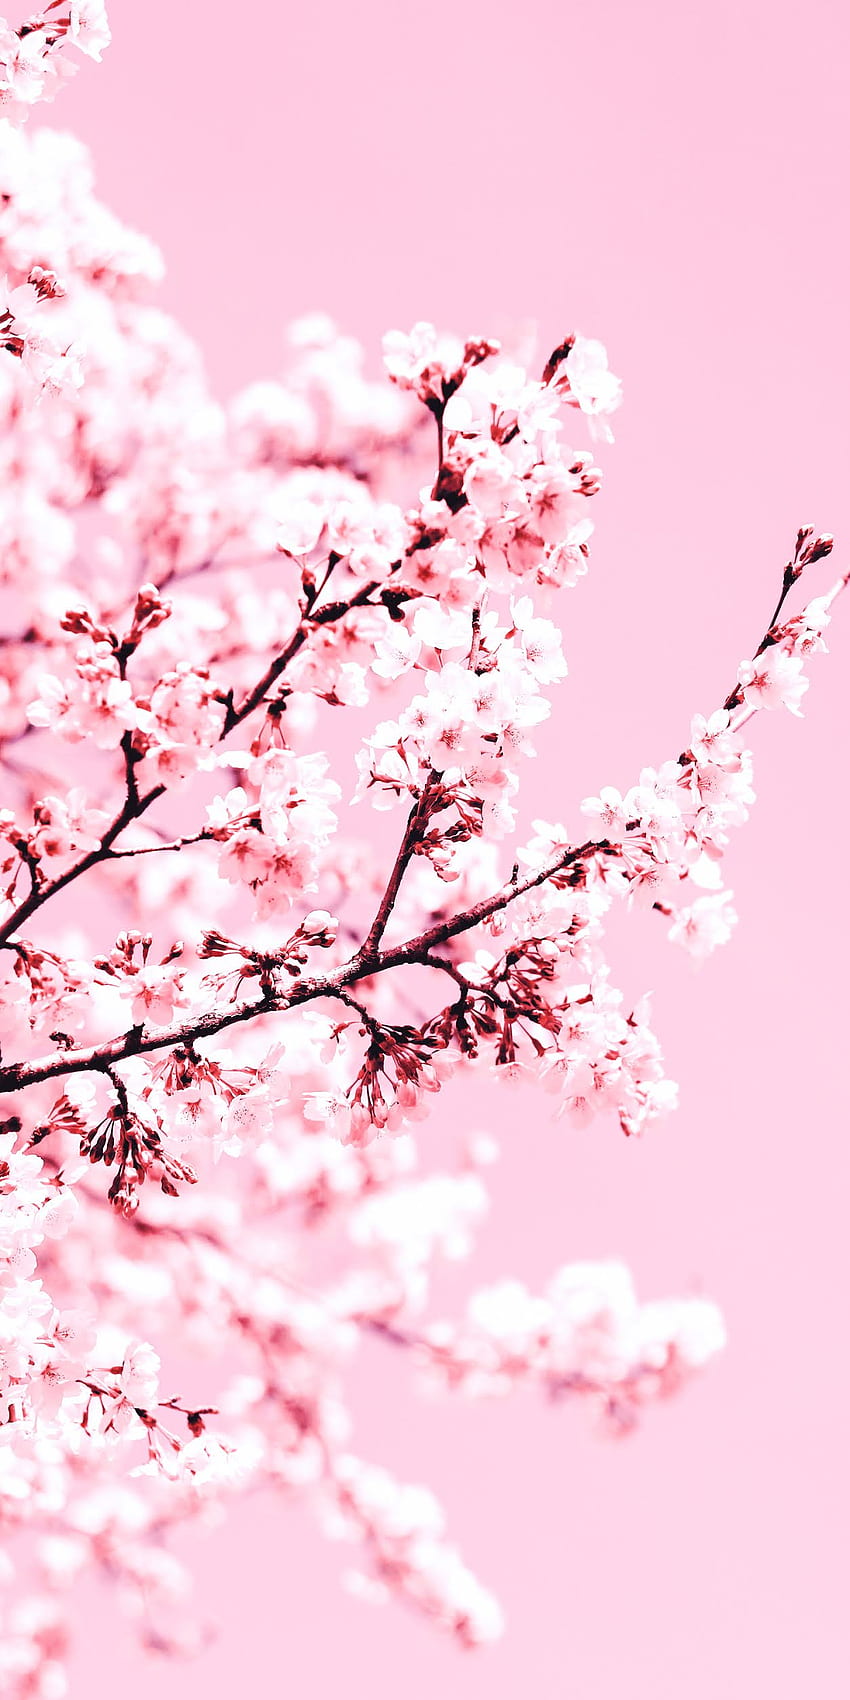 Architectural Cherry Blossom Japanese Aesthetic Powerpoint Background For  Free Download - Slidesdocs